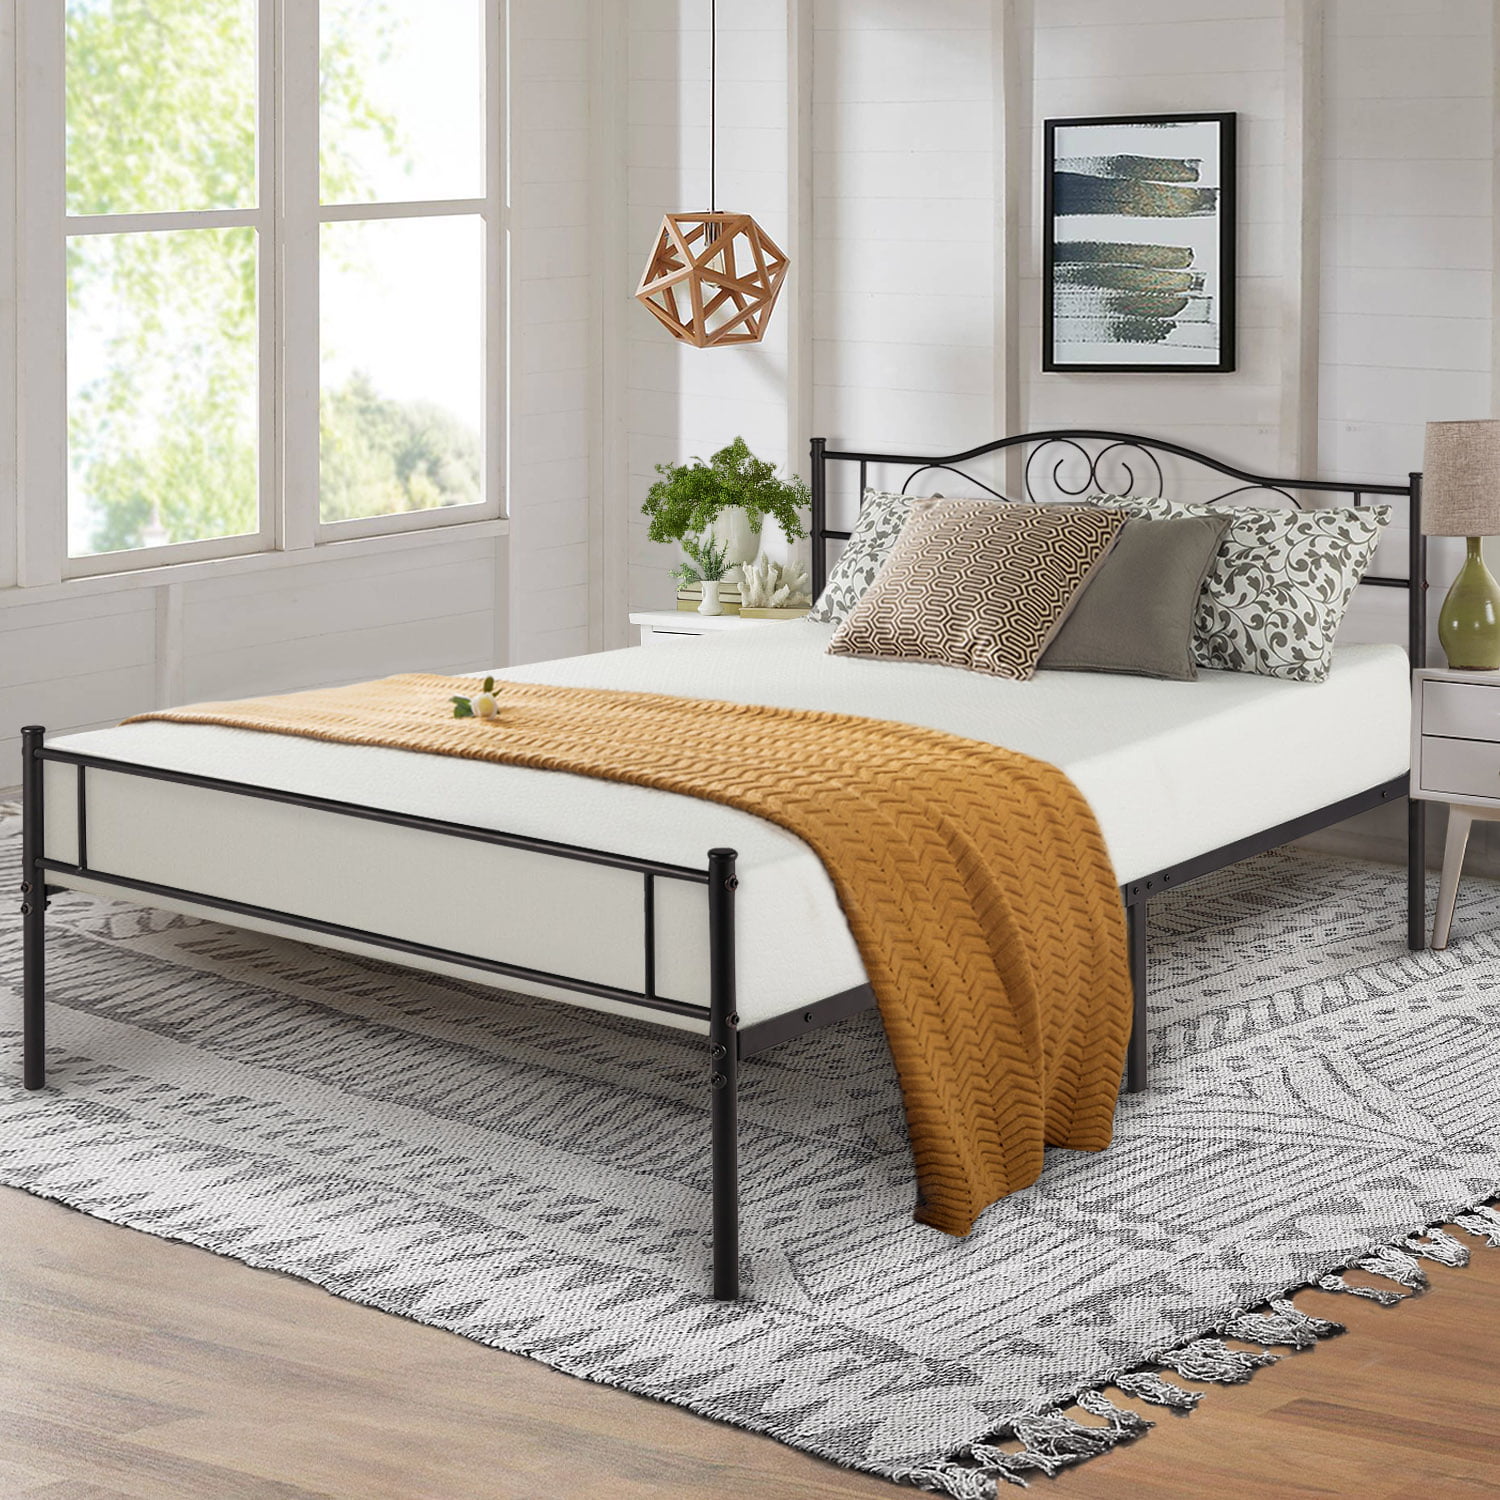 VECELO Queen Size Metal Bed Frame With Headboard Platform Bed Frame,Non